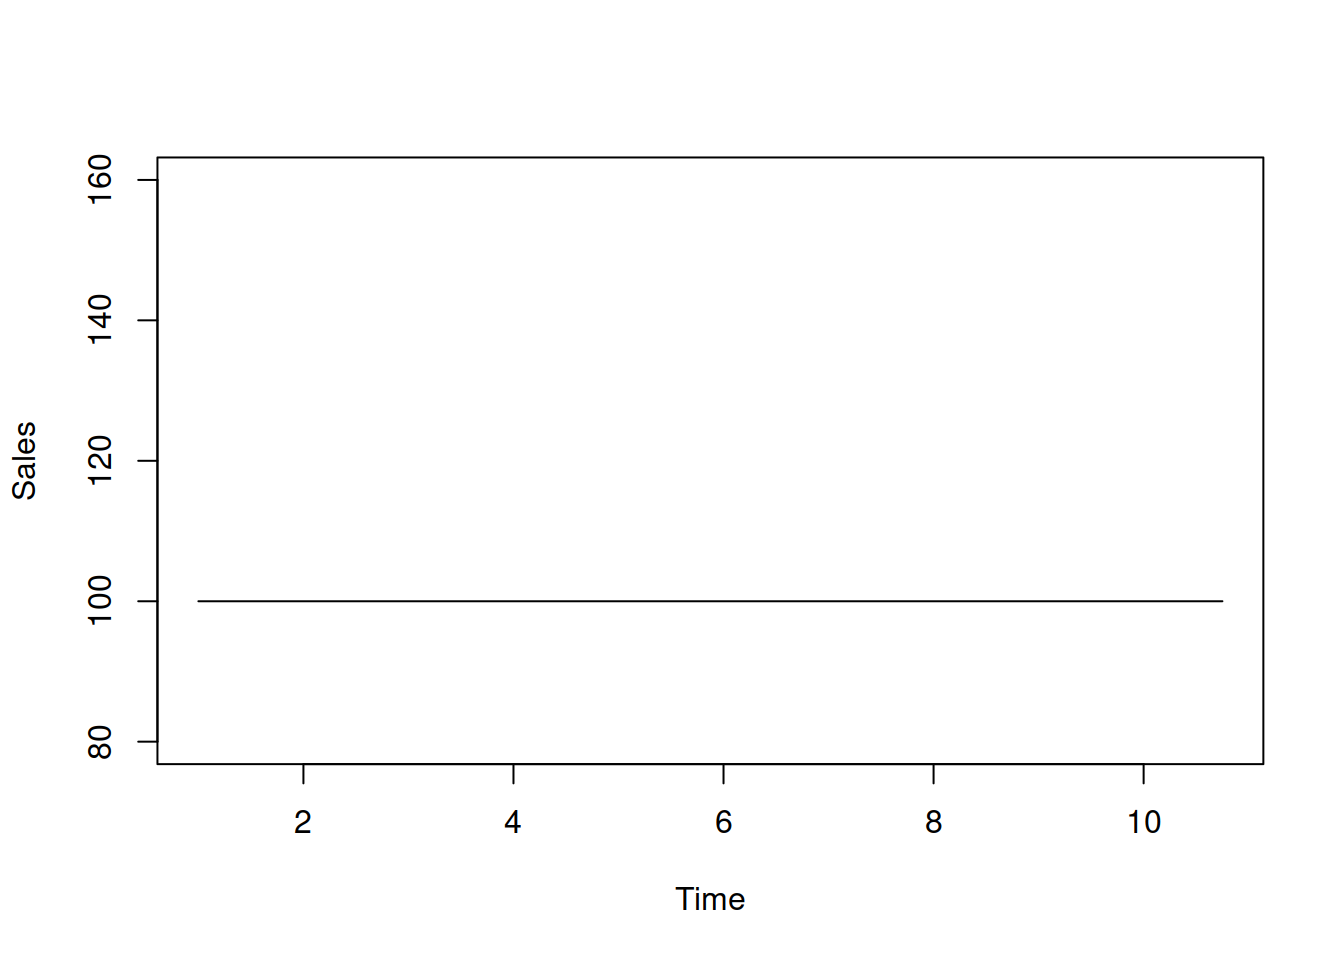 Level of time series without any variability.